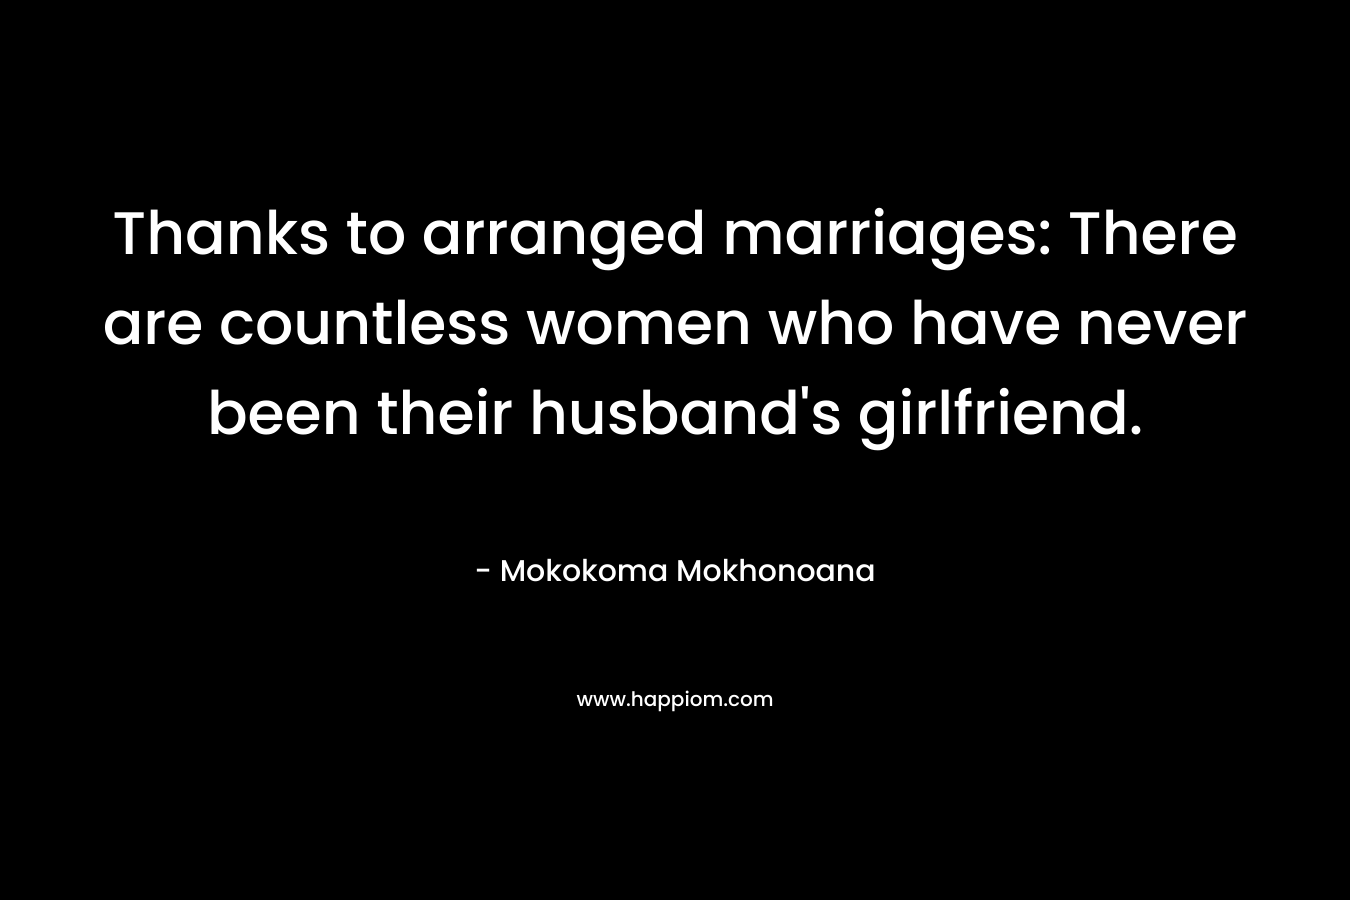 Thanks to arranged marriages: There are countless women who have never been their husband’s girlfriend. – Mokokoma Mokhonoana